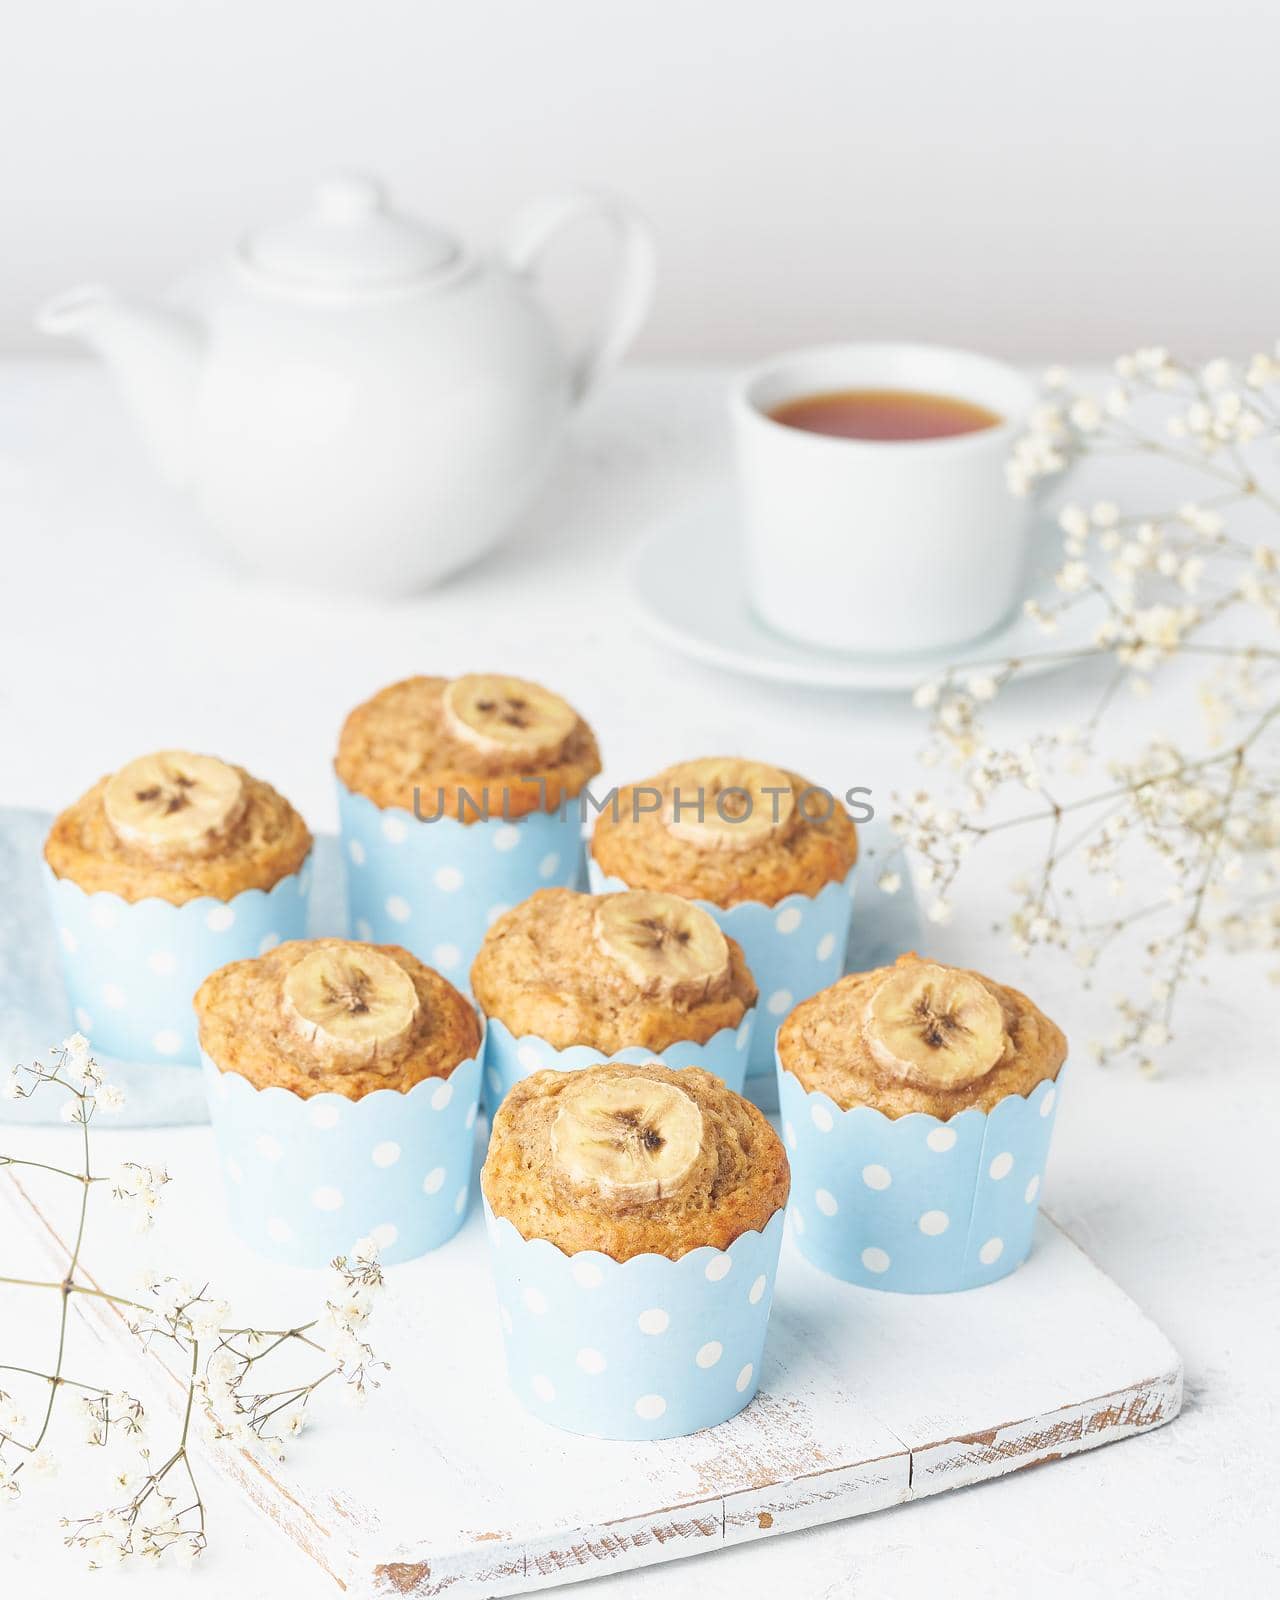 Banana muffin, cupcakes in blue cake cases paper, side view, vertical, white concrete table by NataBene